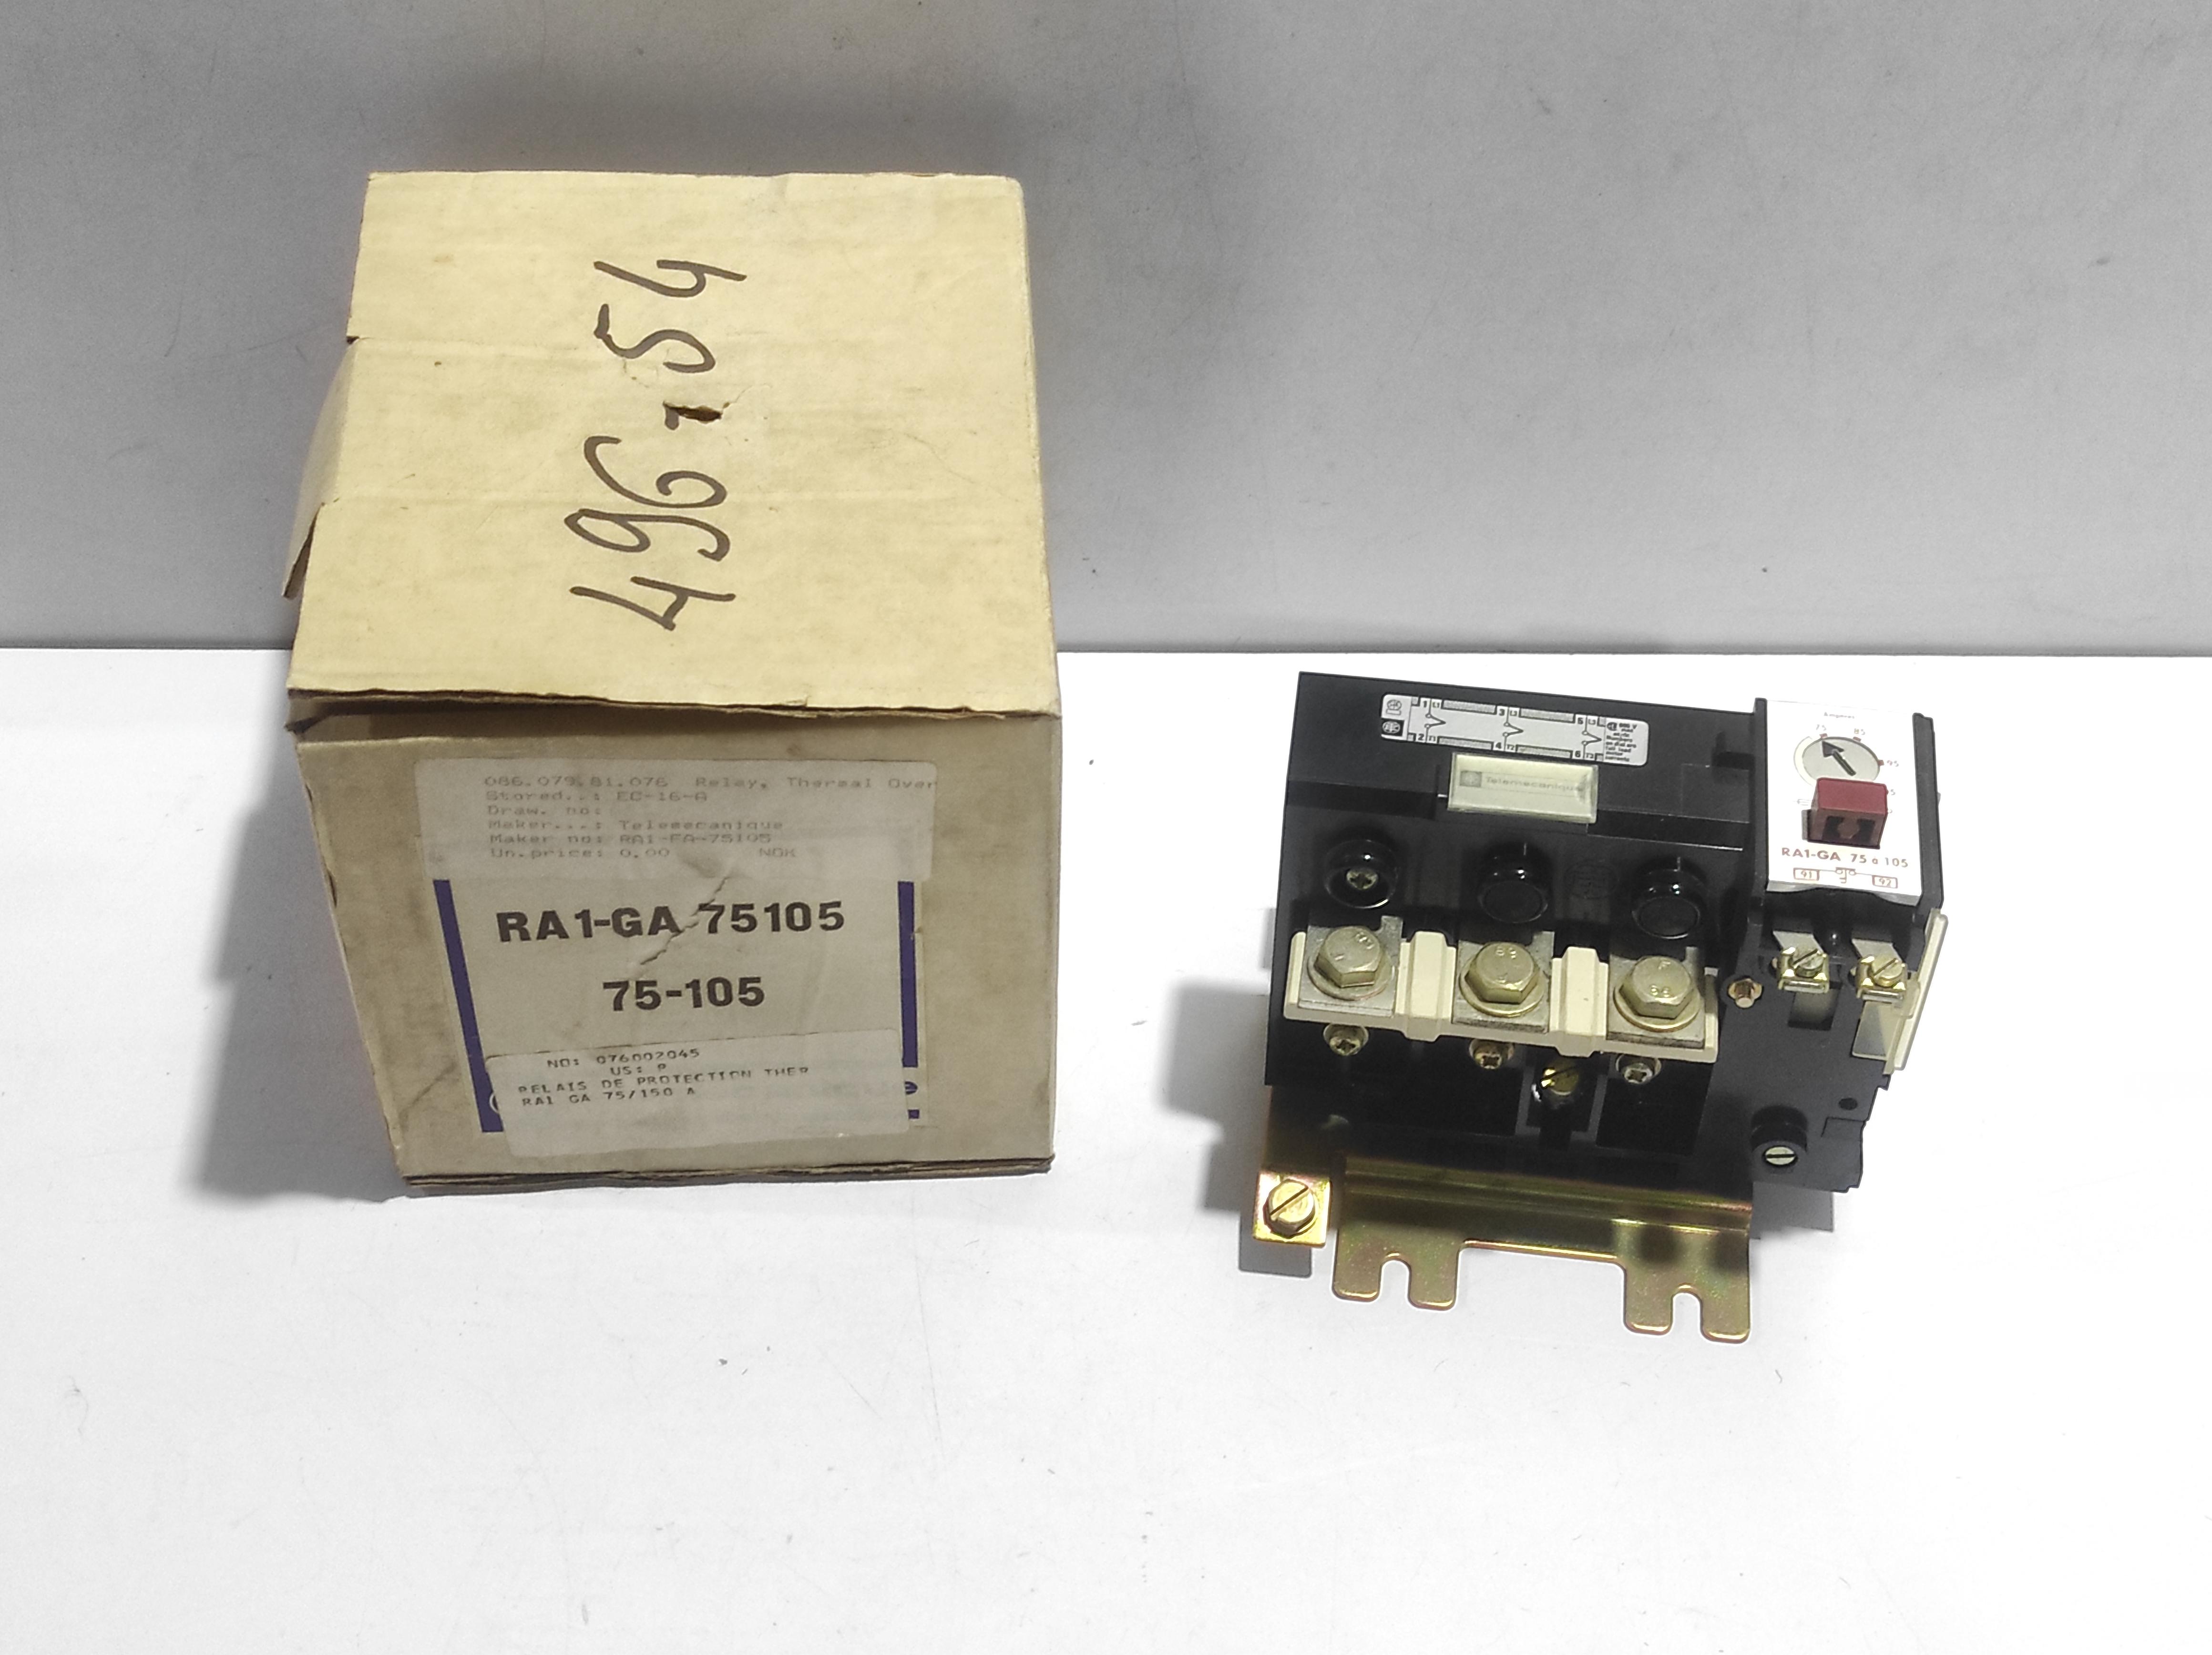 Telemecanique RA1-GA 75105 Thermal Overload Relay 75-105 A